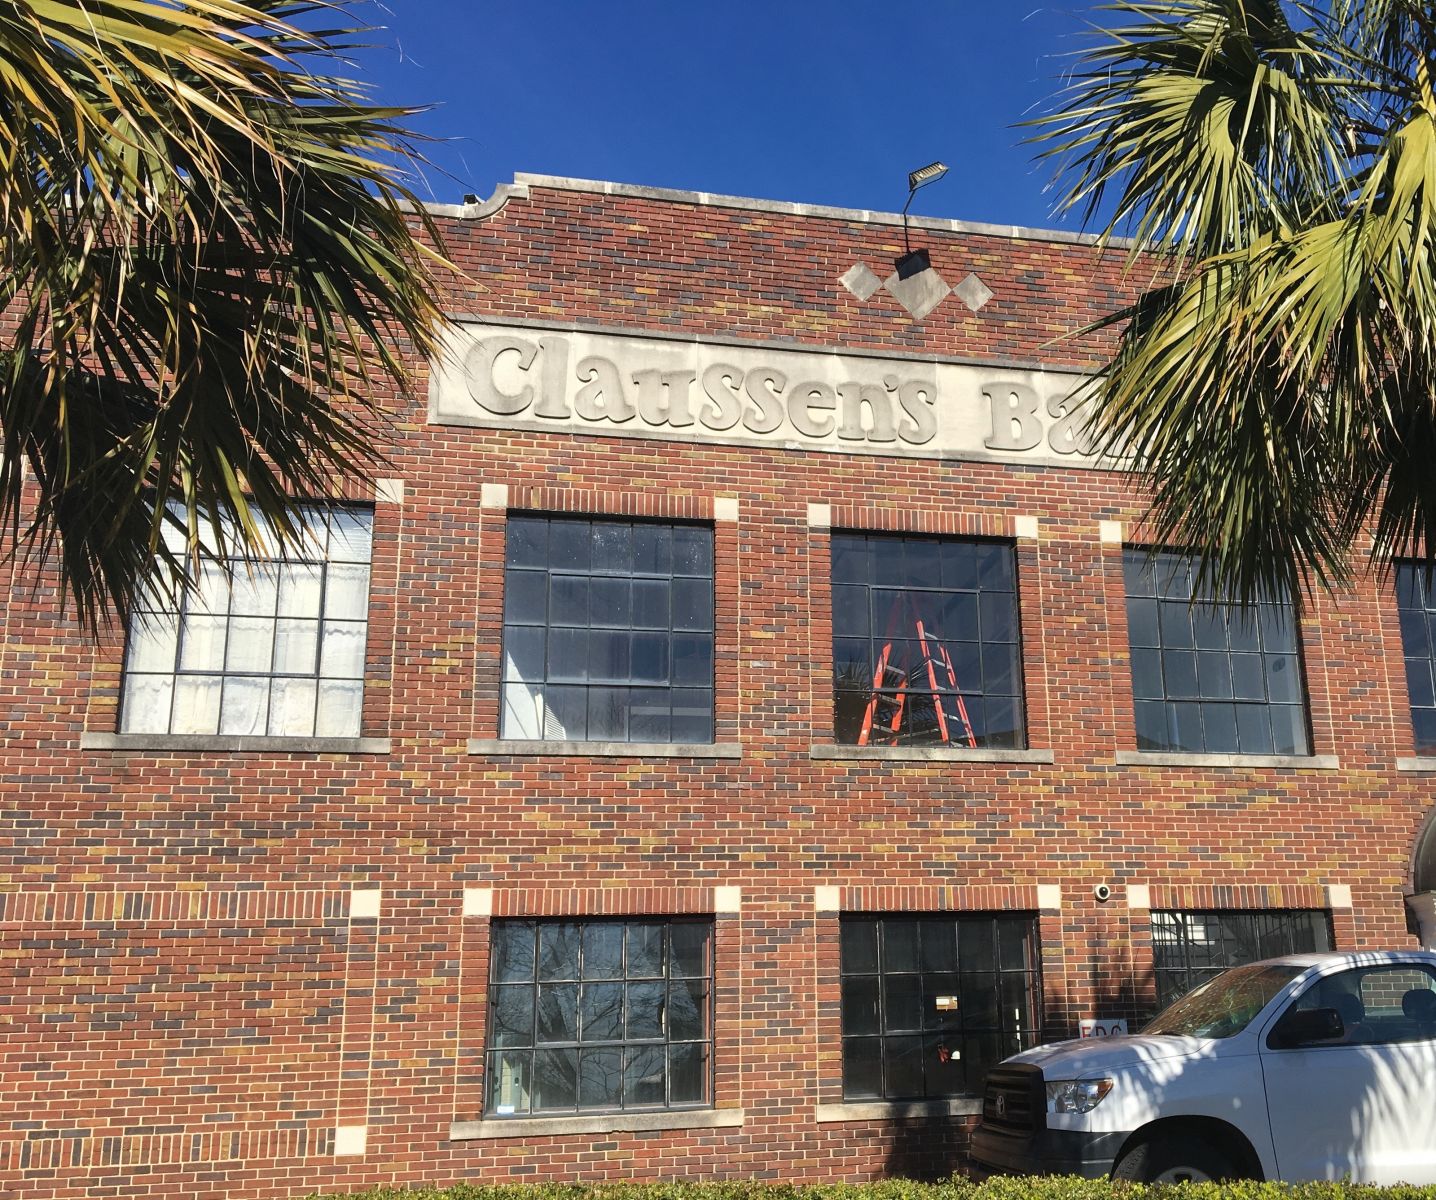 Claussen's in Five Points is being renovated into 29 boutique apartments slated for occupancy in March. (Photo/Melinda Waldrop)